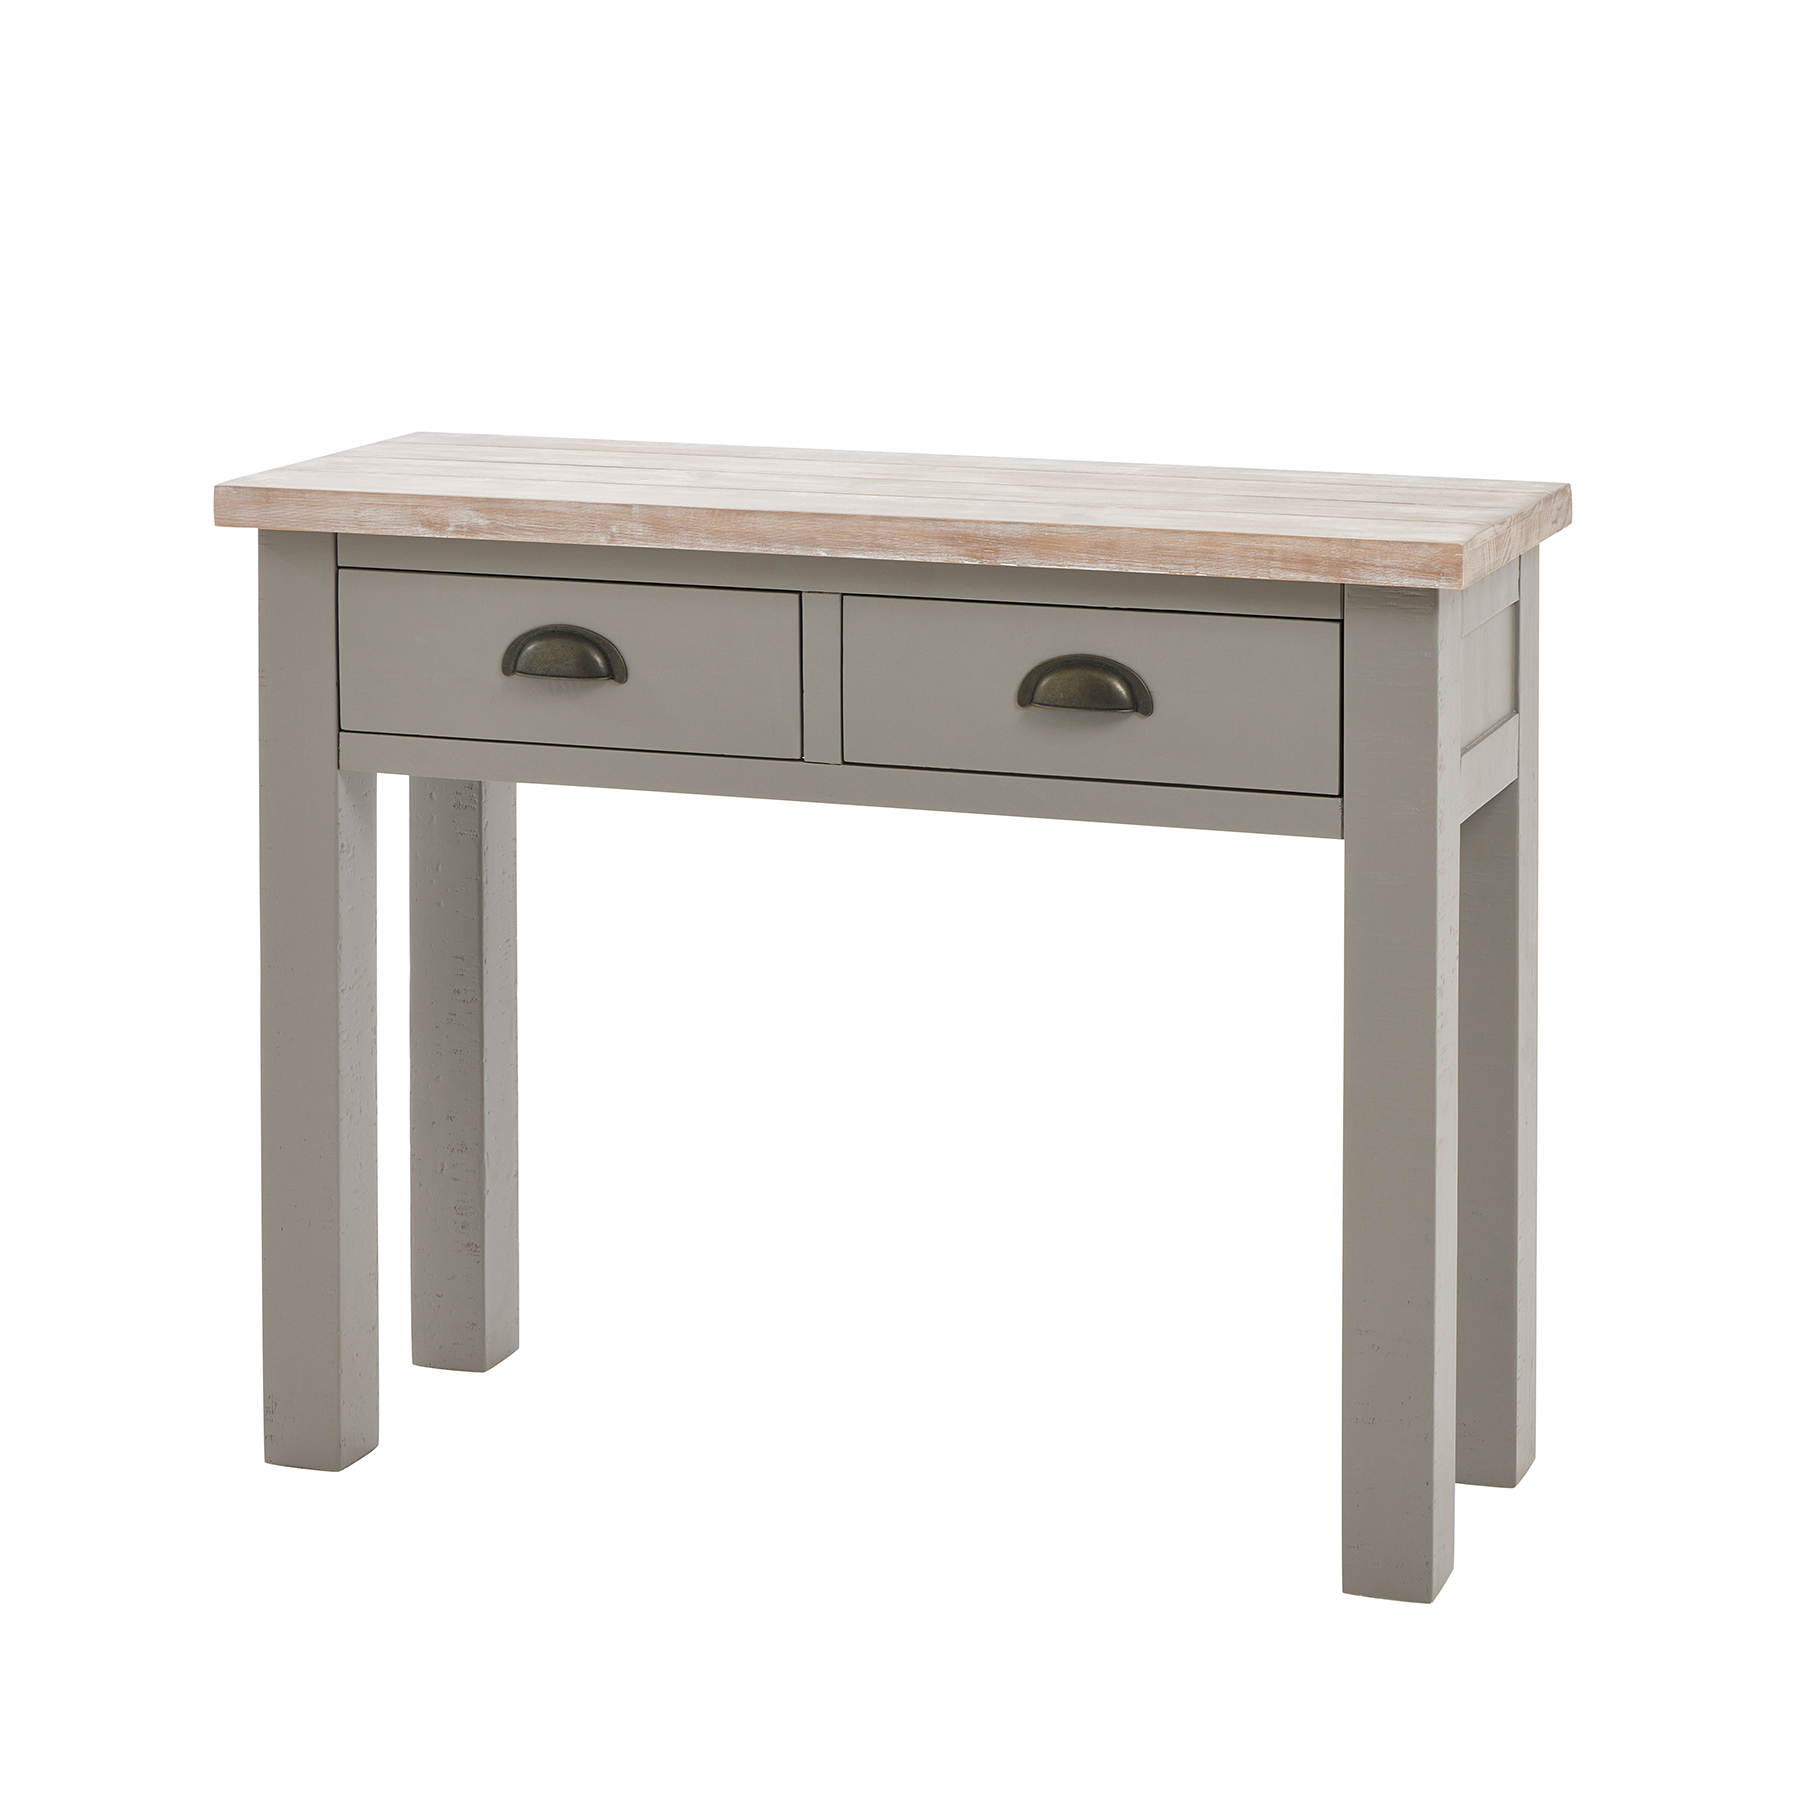 The Oxley Collection Two Drawer Console Table - Image 1